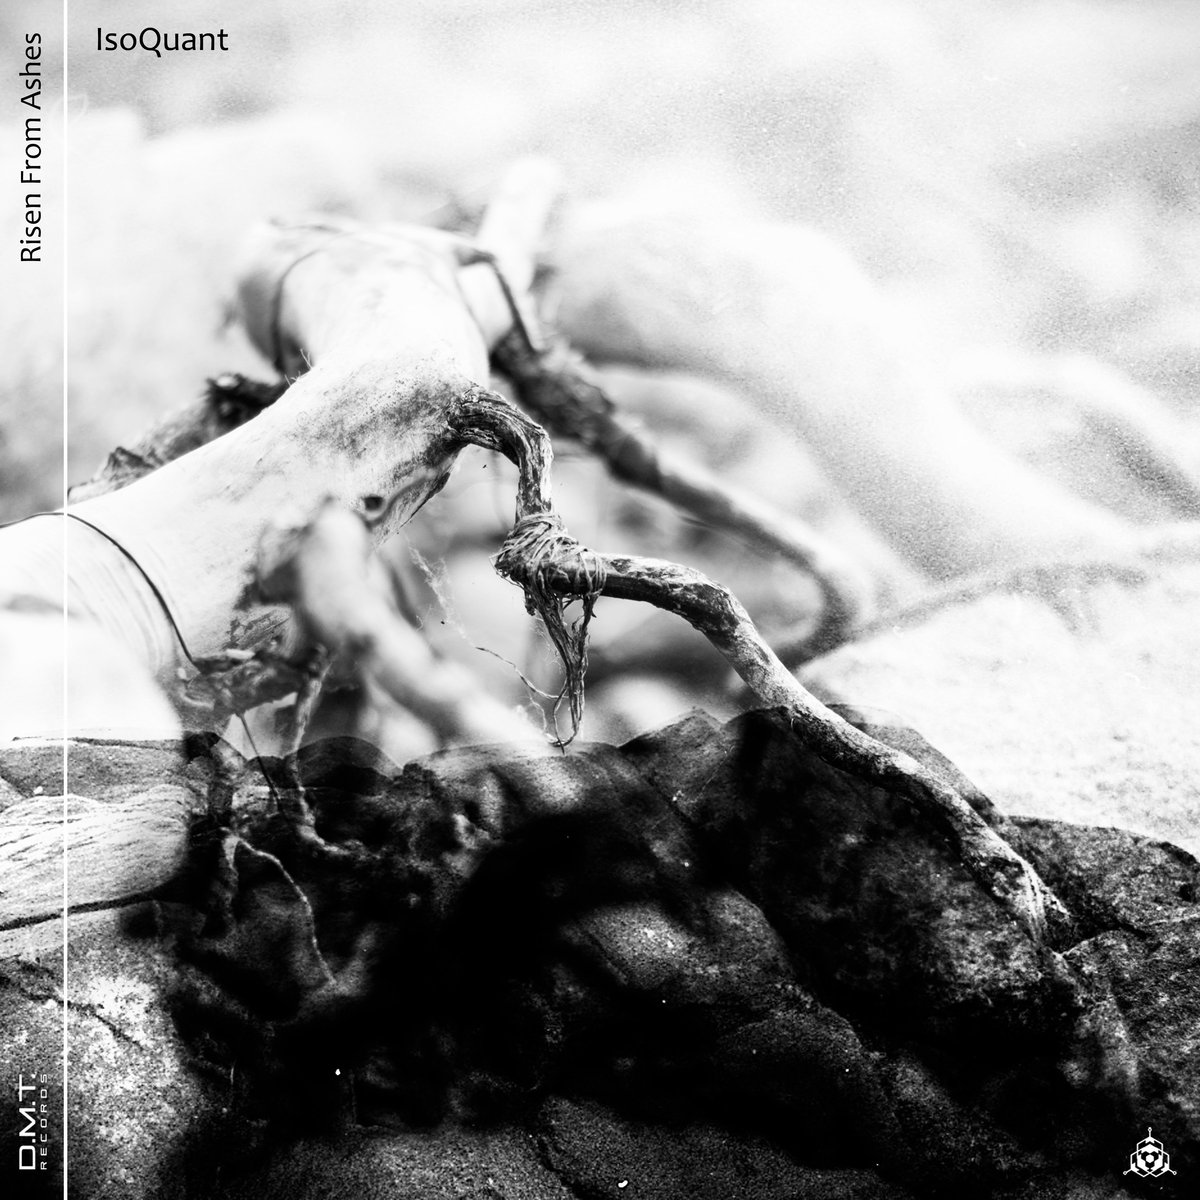 IsoQuant – Risen From Ashes